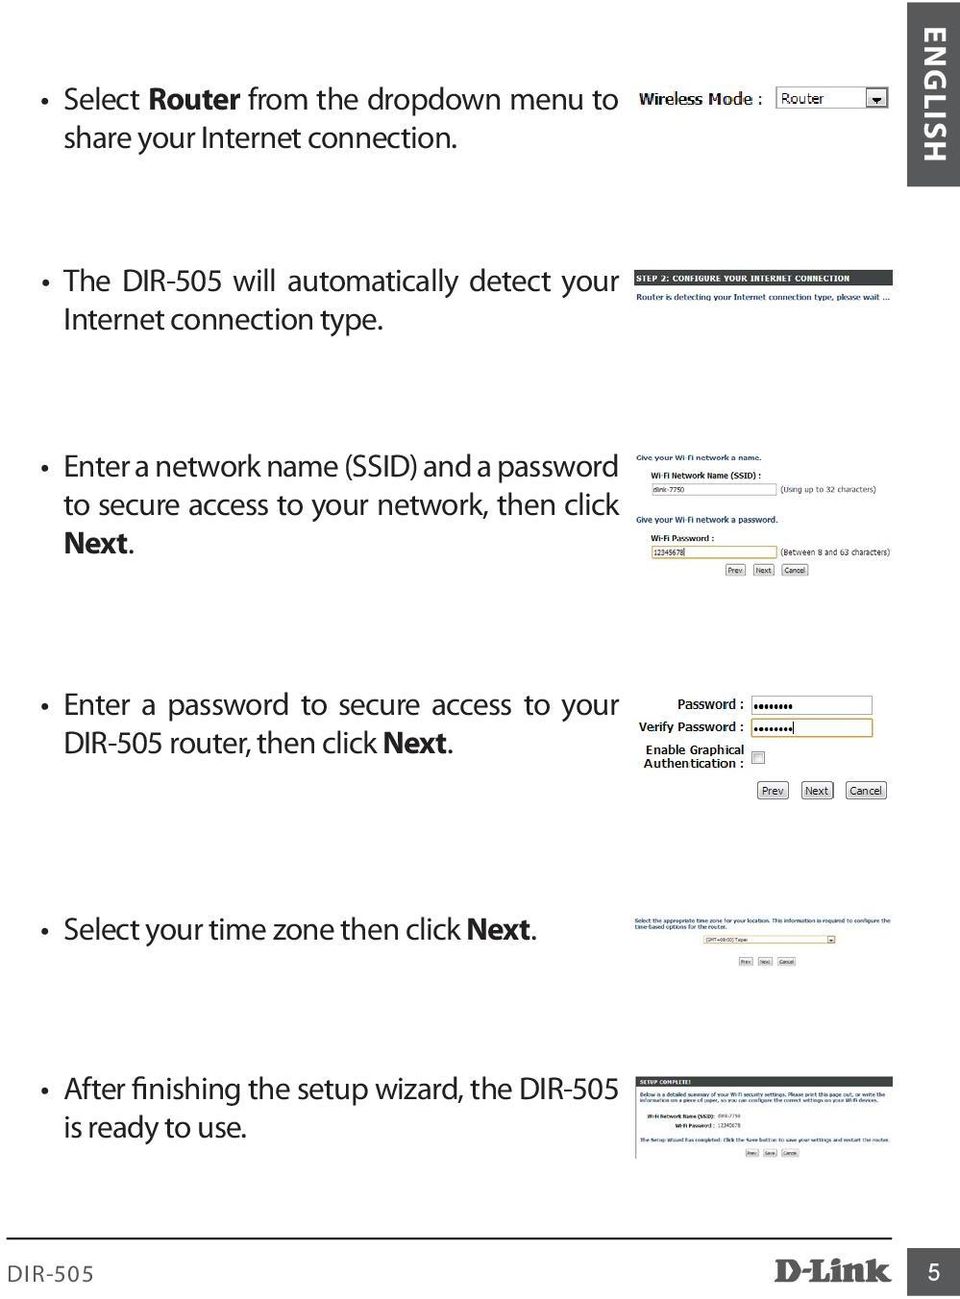 Enter a network name (SSID) and a password to secure access to your network, then click Next.